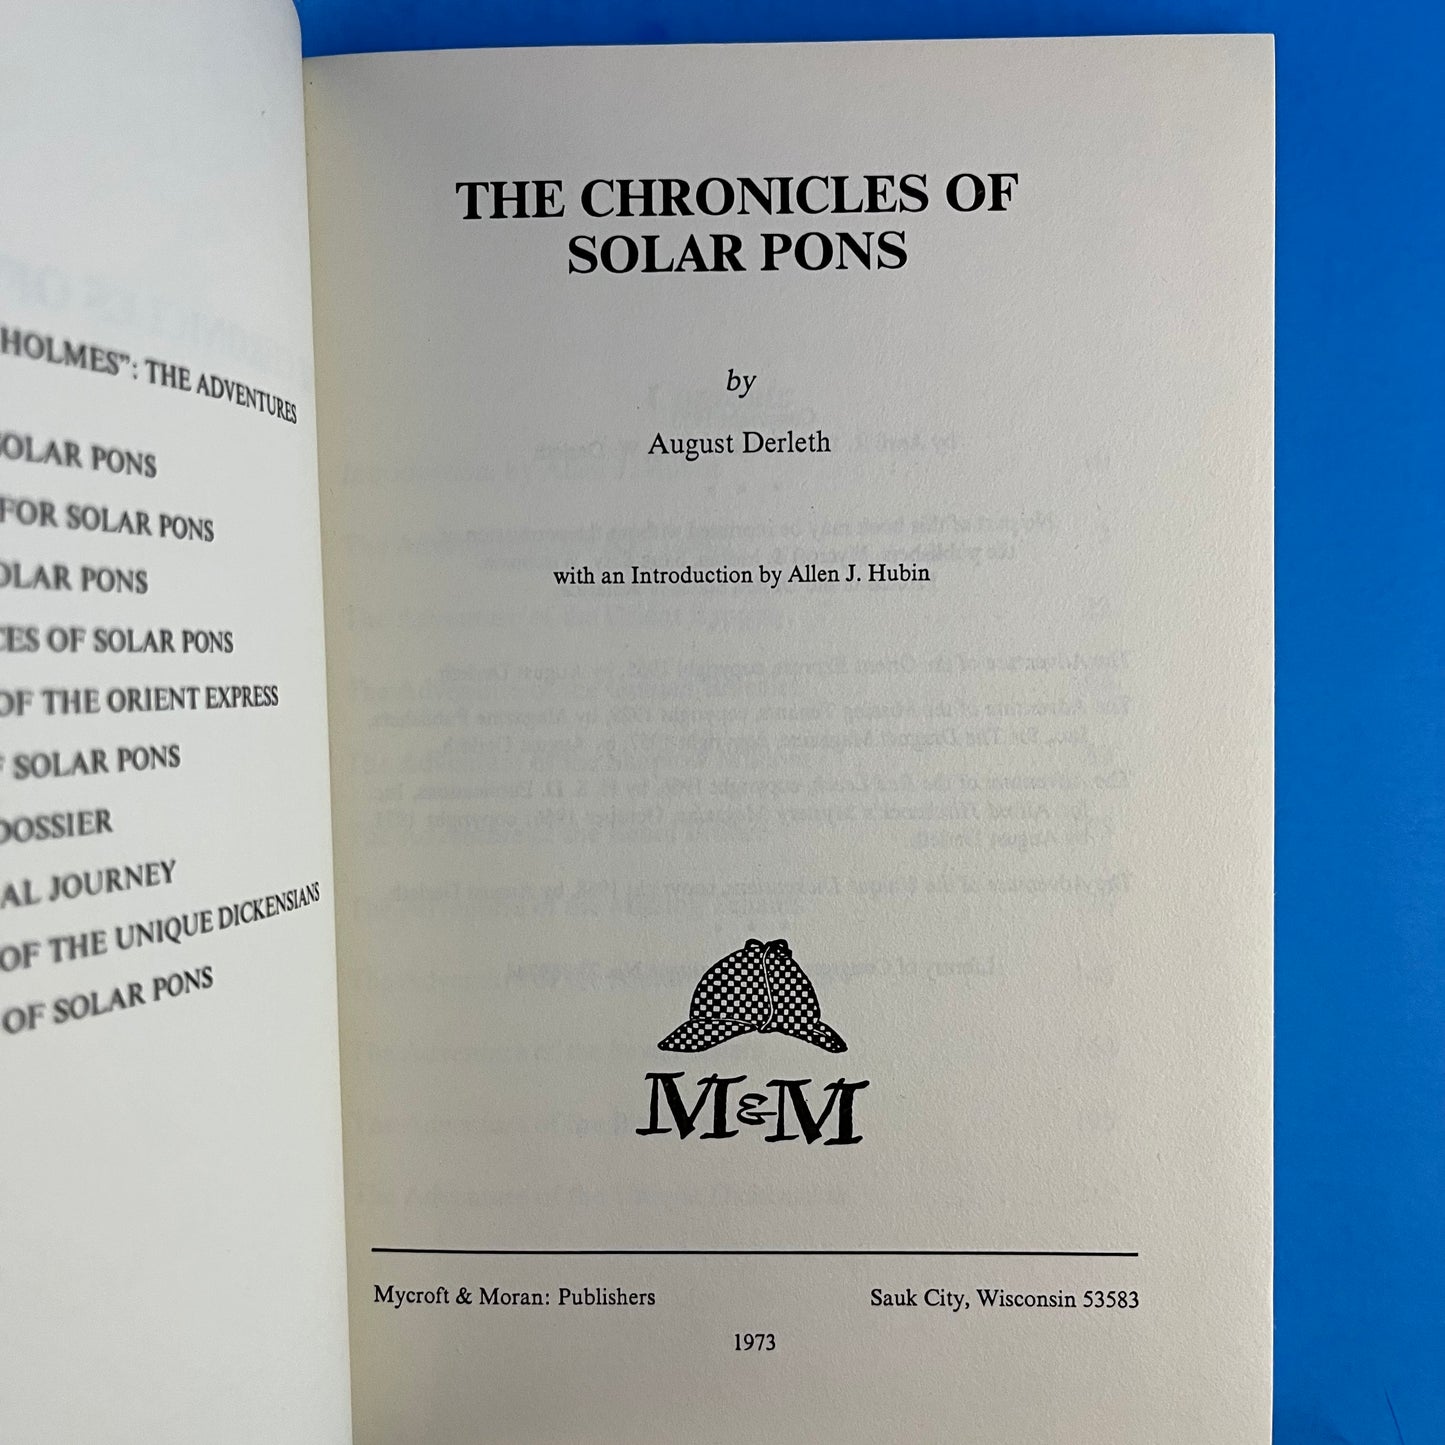 The Chronicles of Solar Pons